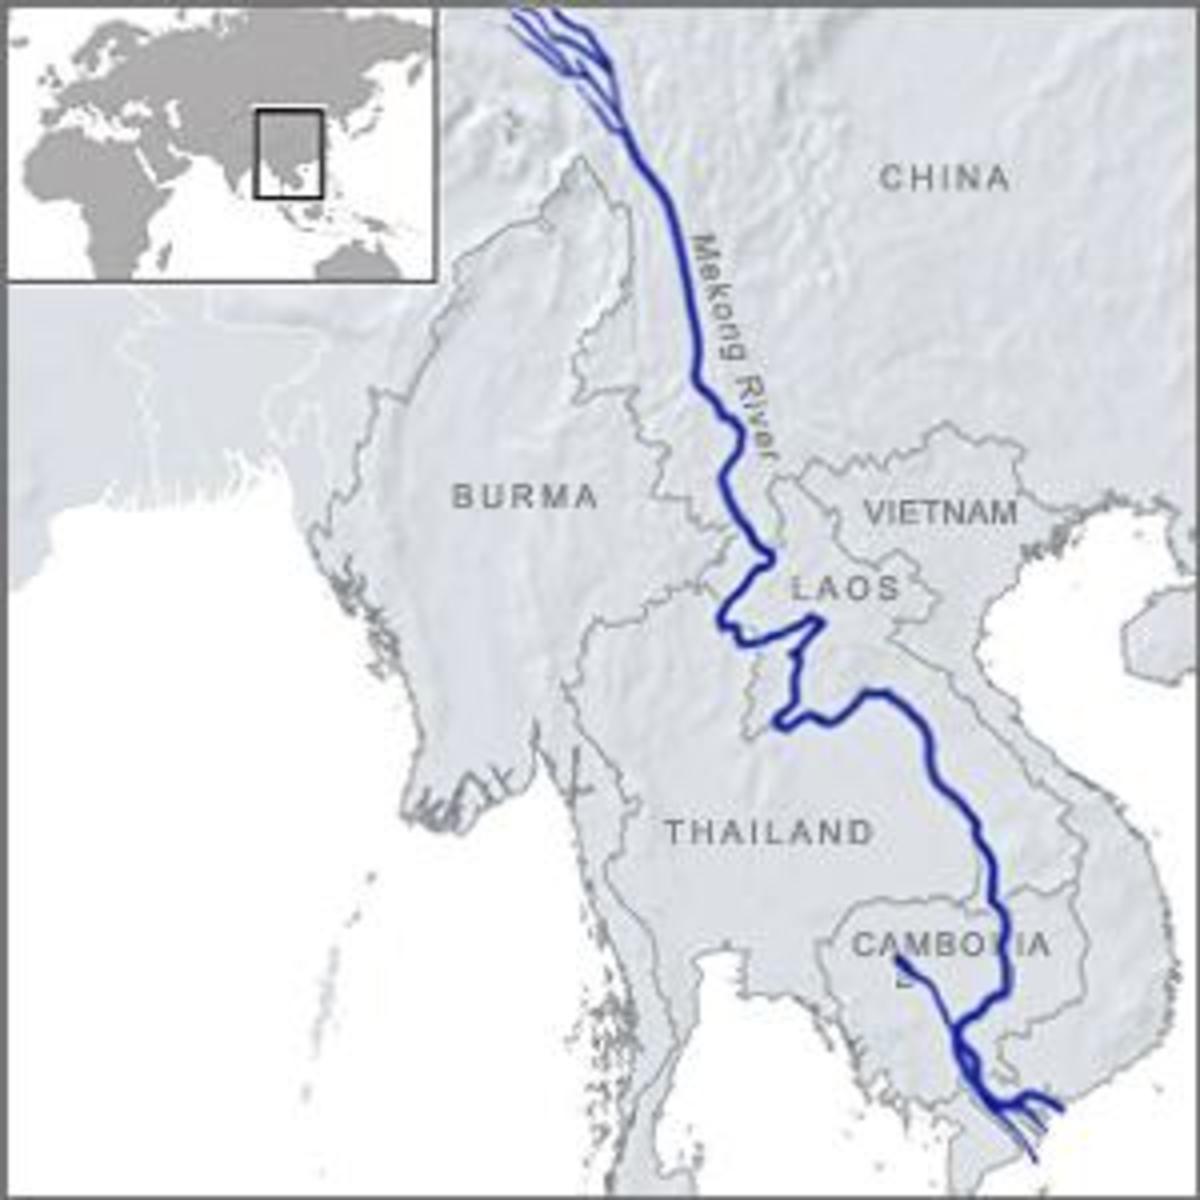 Mekong River Route